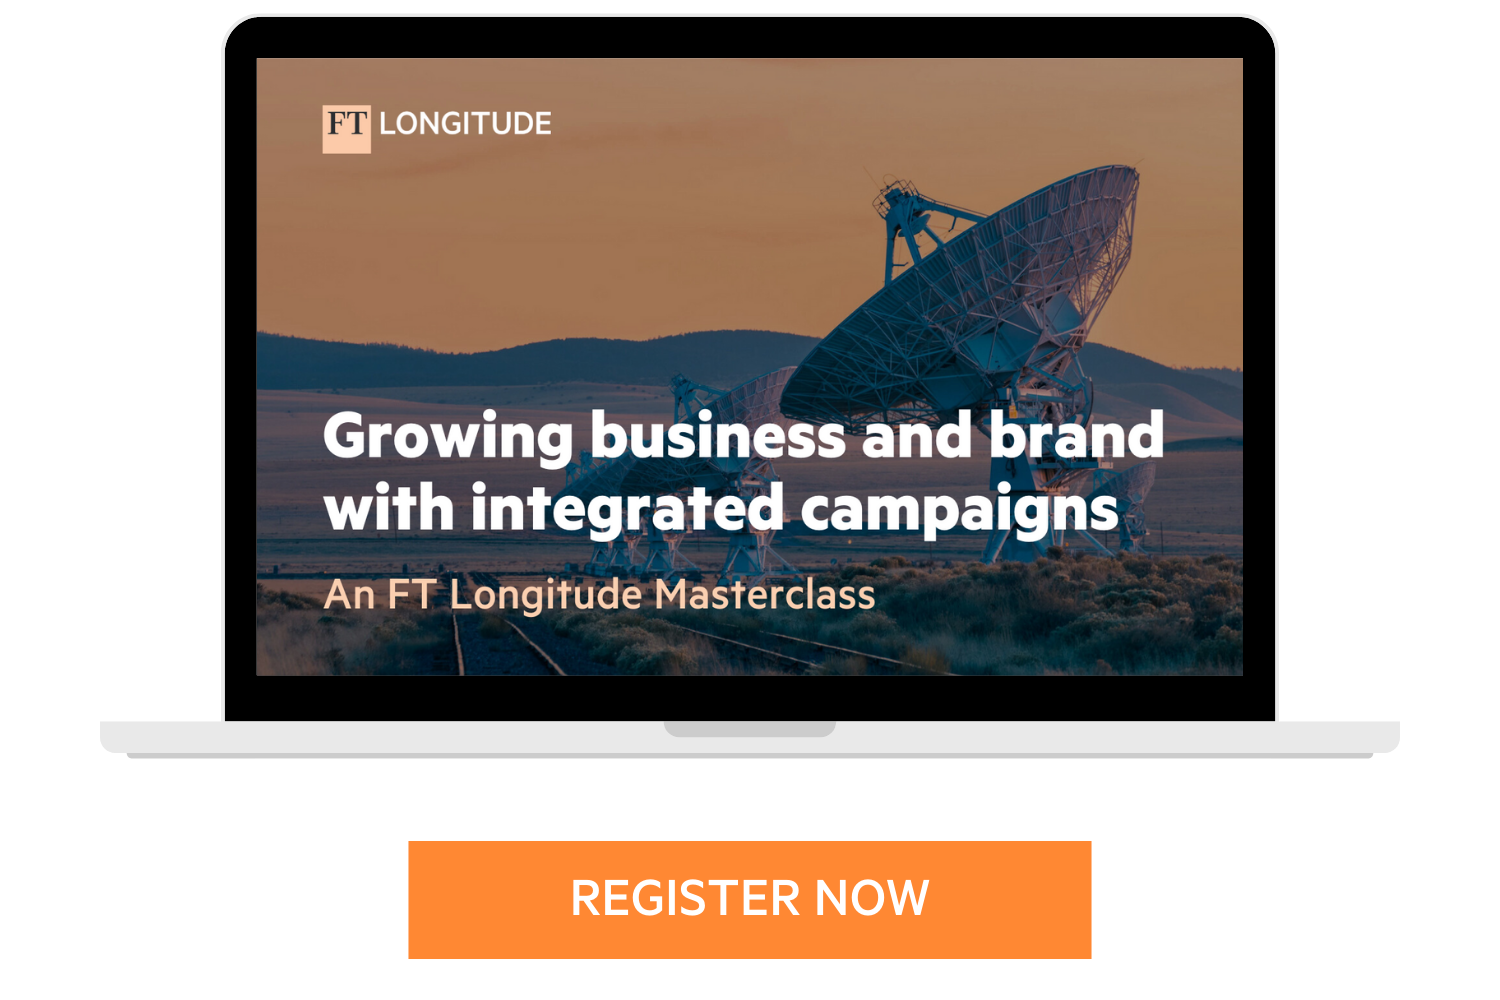 Growing business and brand with integrated campaigns